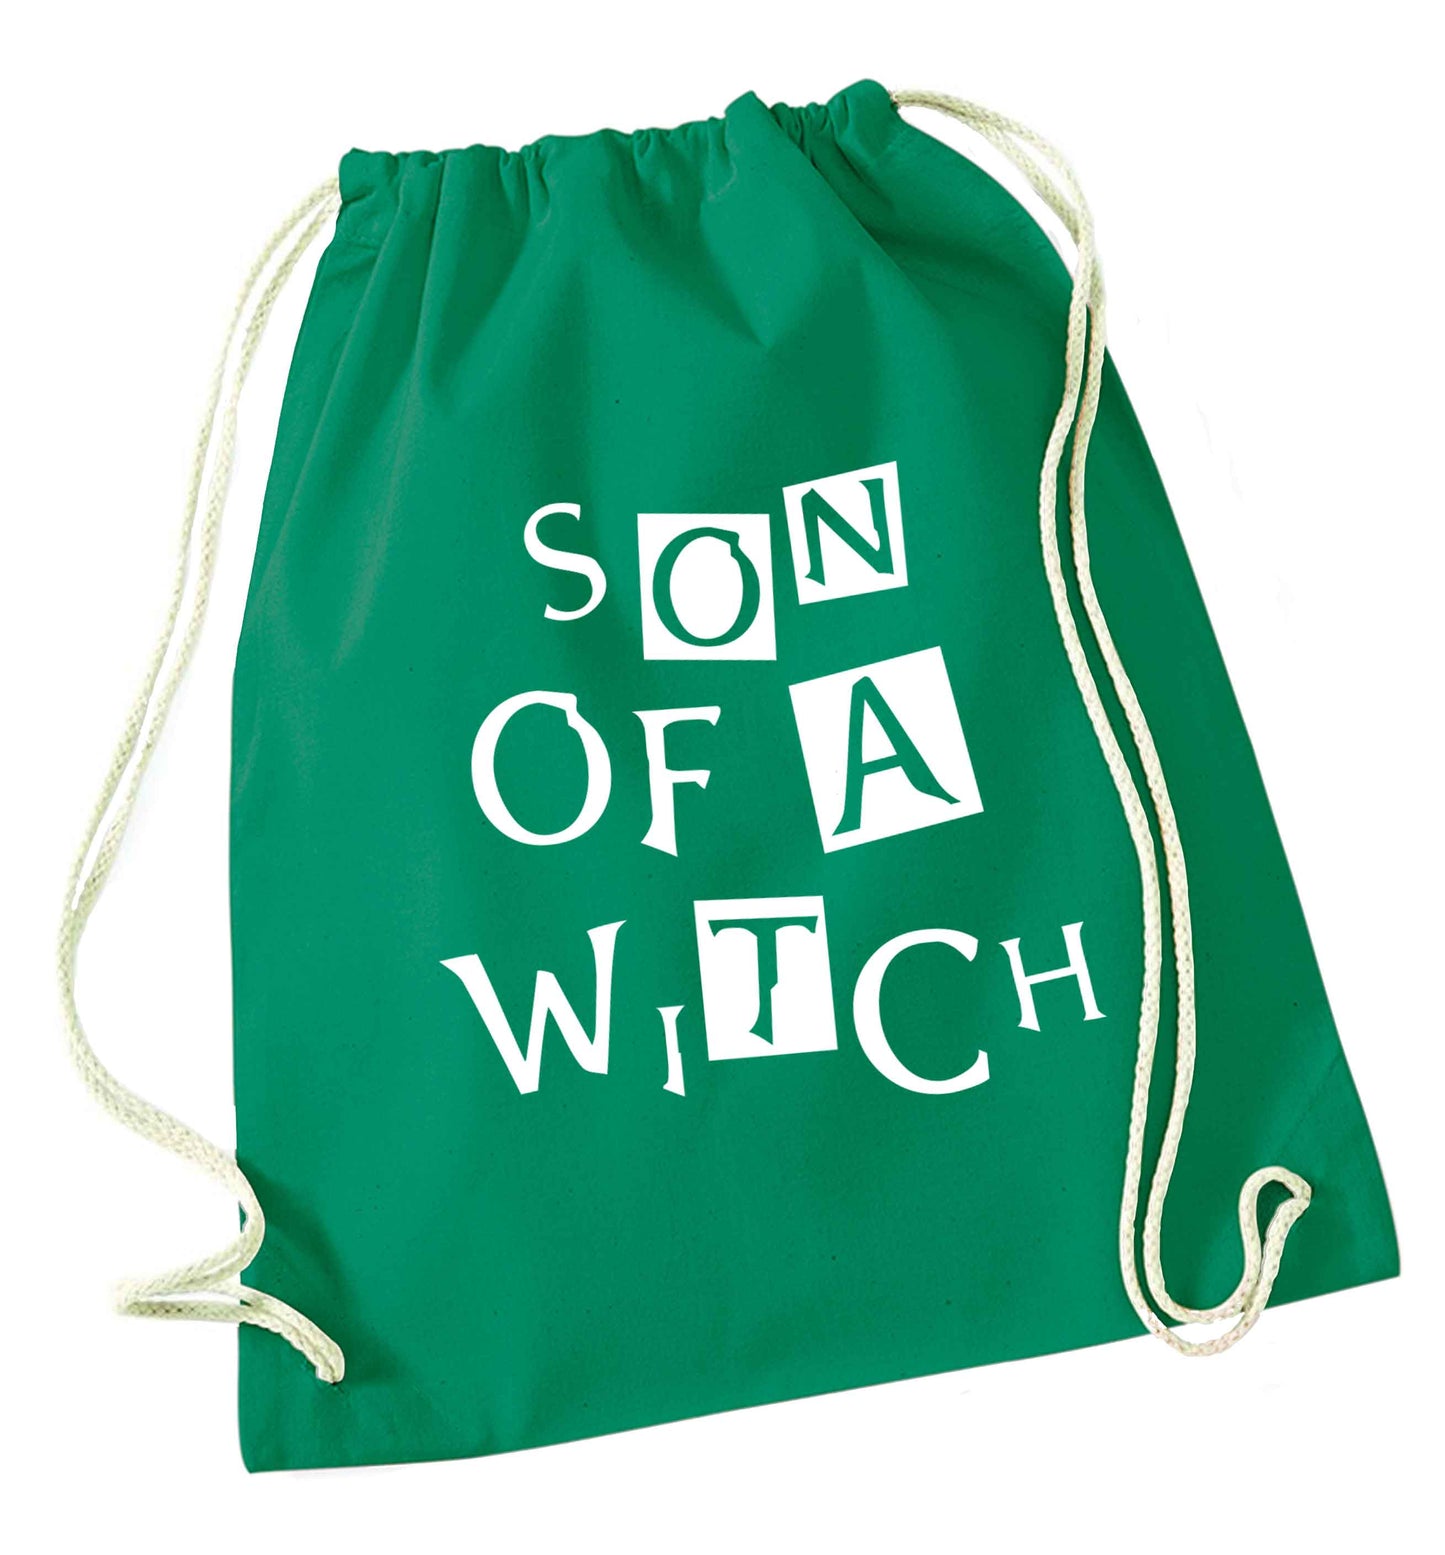 Son of a witch green drawstring bag